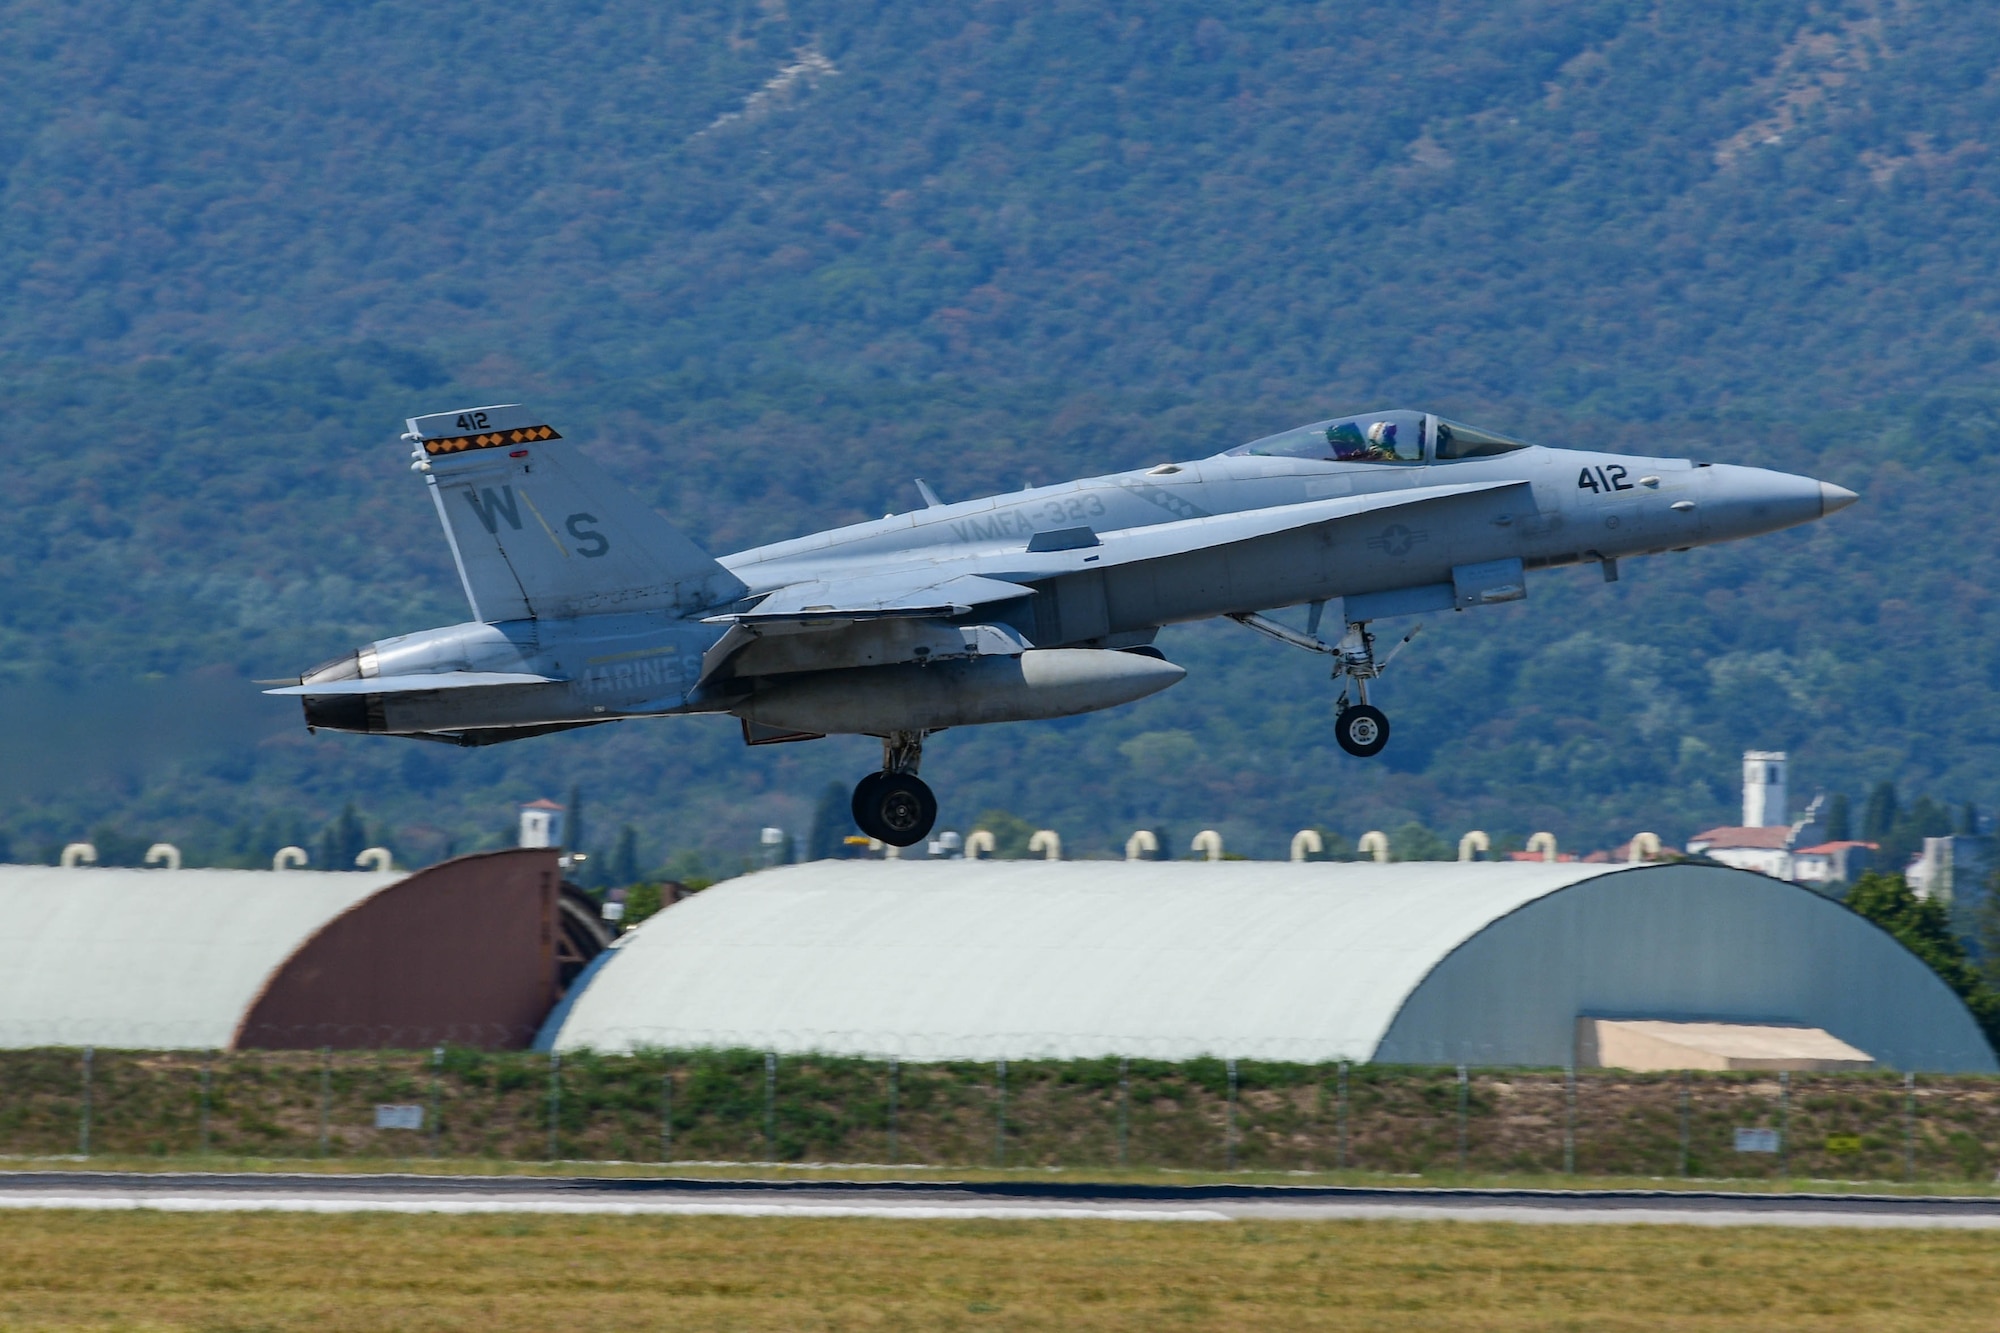 A U.S. Marine Corps F/A-18 Hornet assigned to the Marine Fighter Attack Squadron 323 out of Marine Corps Air Station Miramar, California, prepares to land at Aviano Air Base, Italy, Aug. 5, 2022. The VMFA-323 Squadron integrated with the 510th Fighter Squadron and practiced dogfighting, where one F-16 would be paired with one F-18 and whoever gets "gunned" loses. (U.S. Air Force photo by Senior Airman Brooke Moeder)